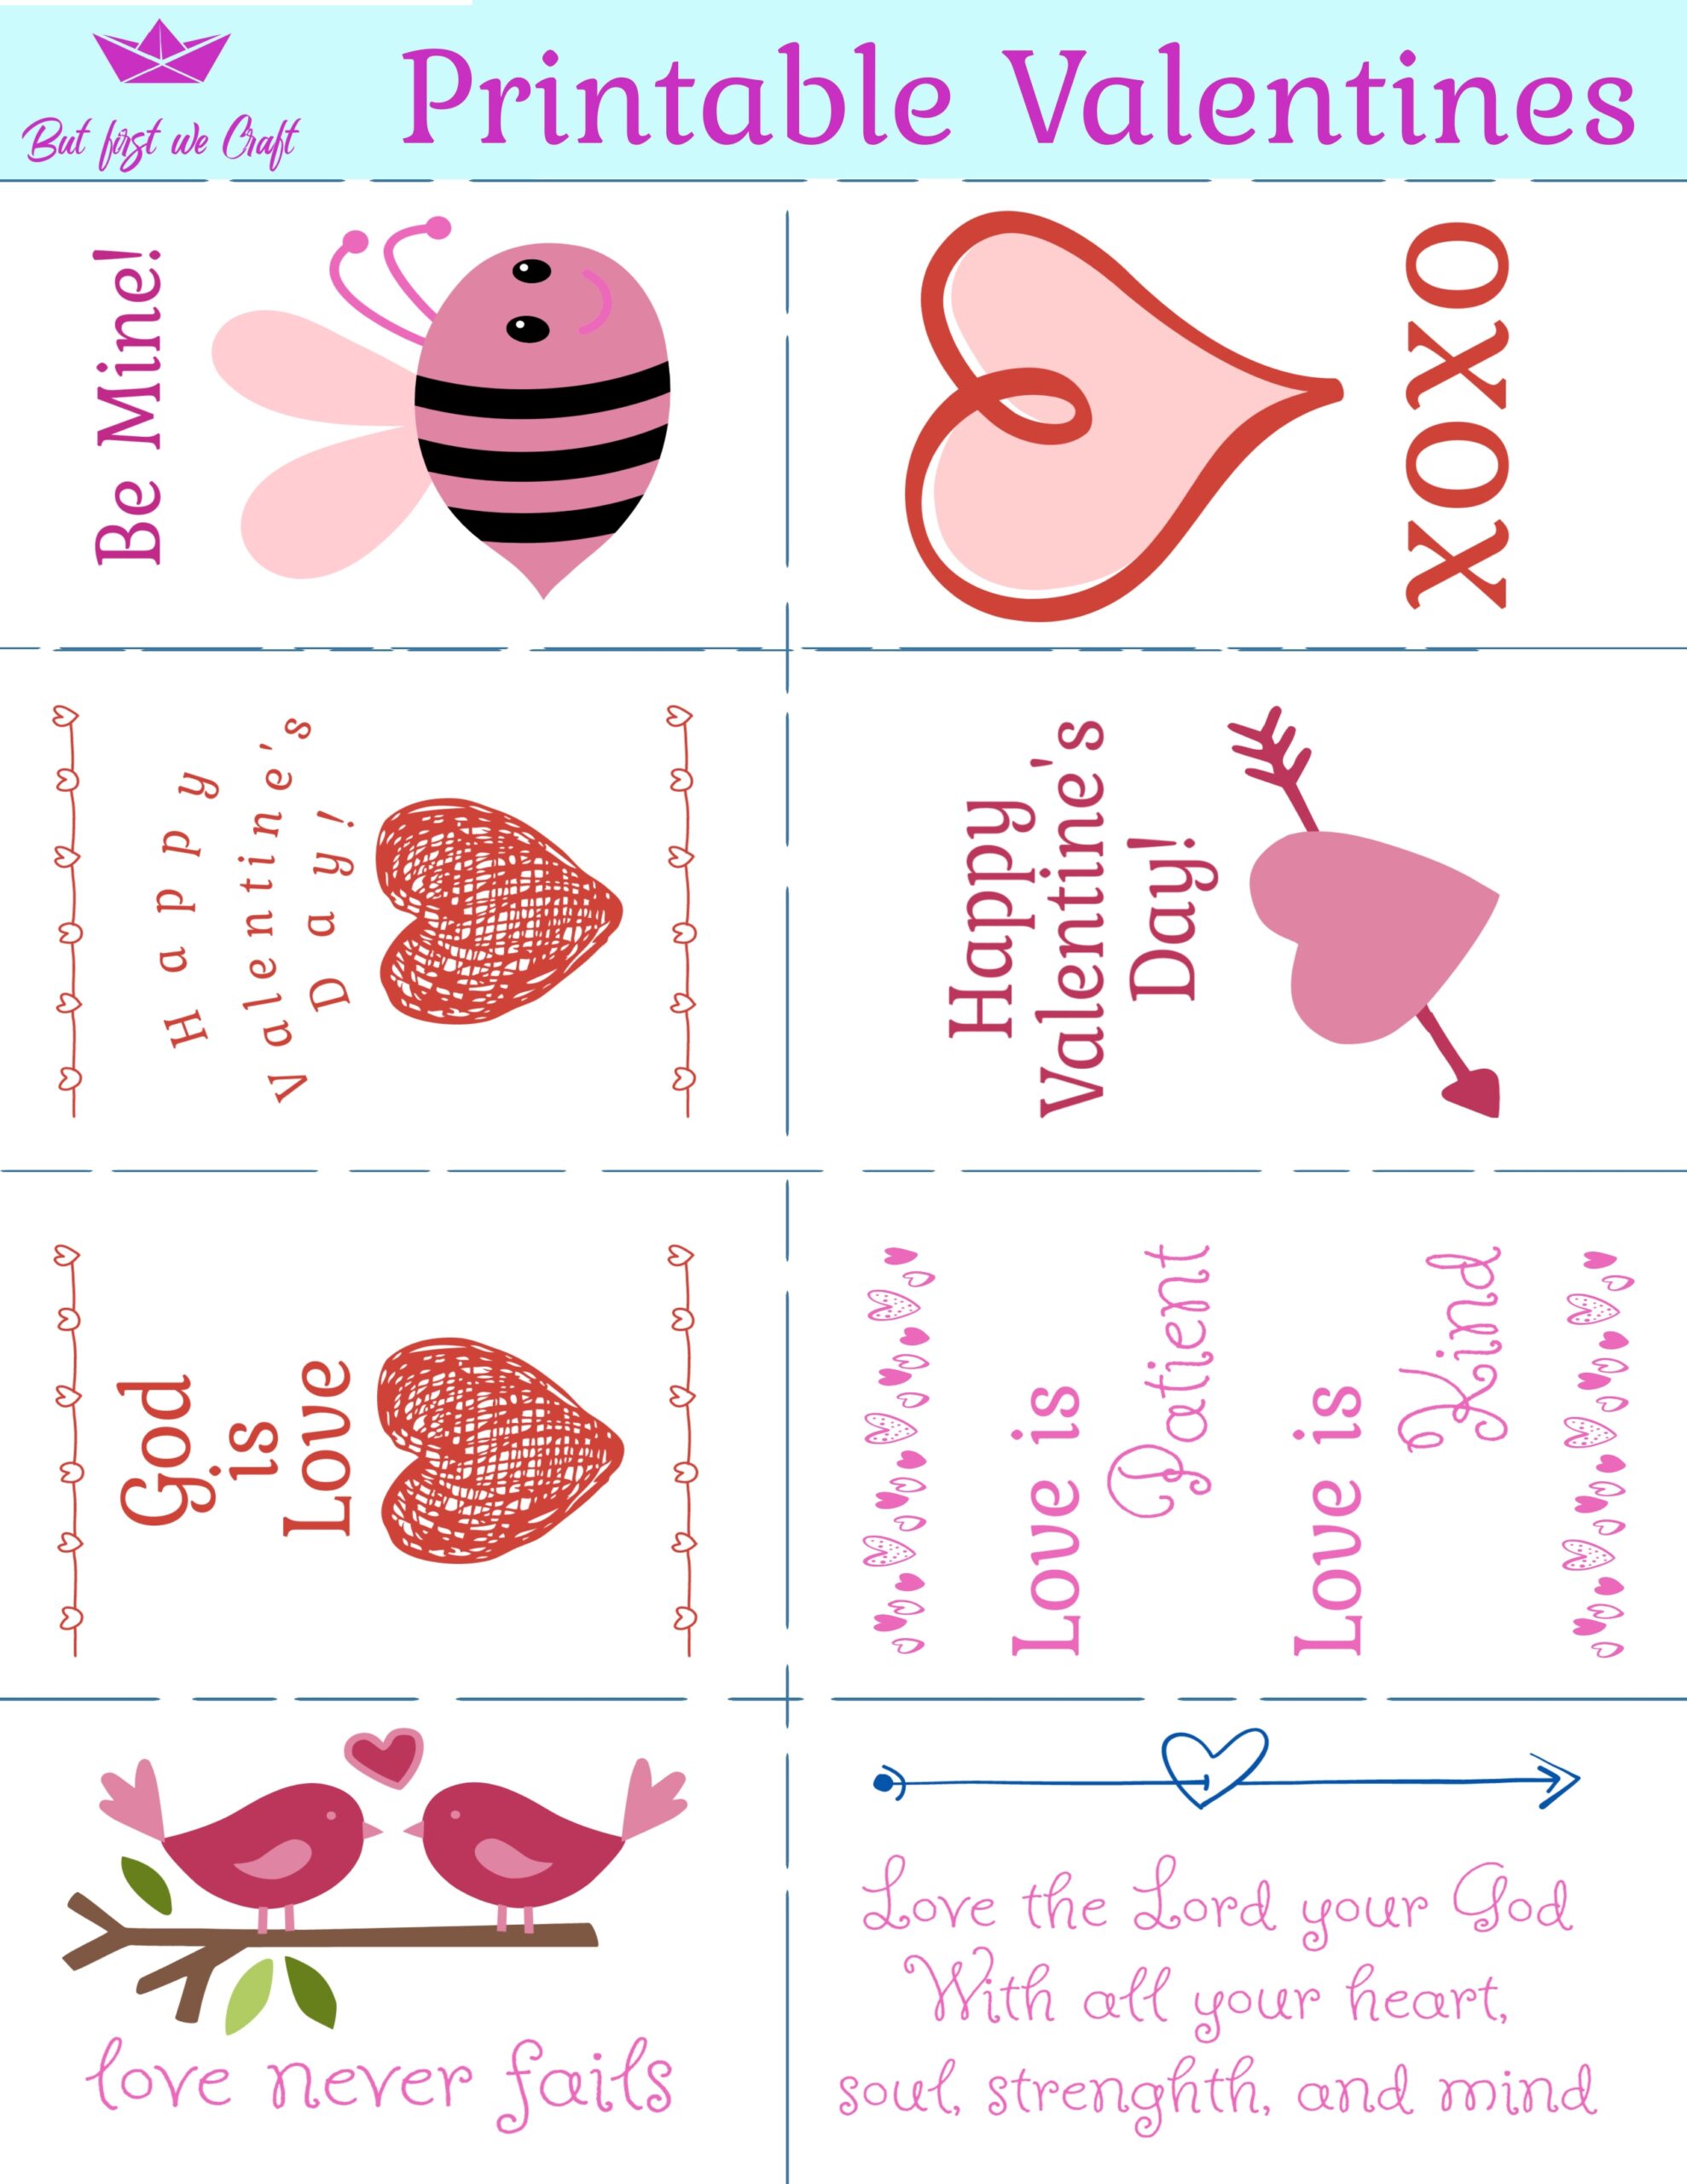 New Free Printable Valentine s Day Cards For Kids But First We Craft - Free Printable Cards